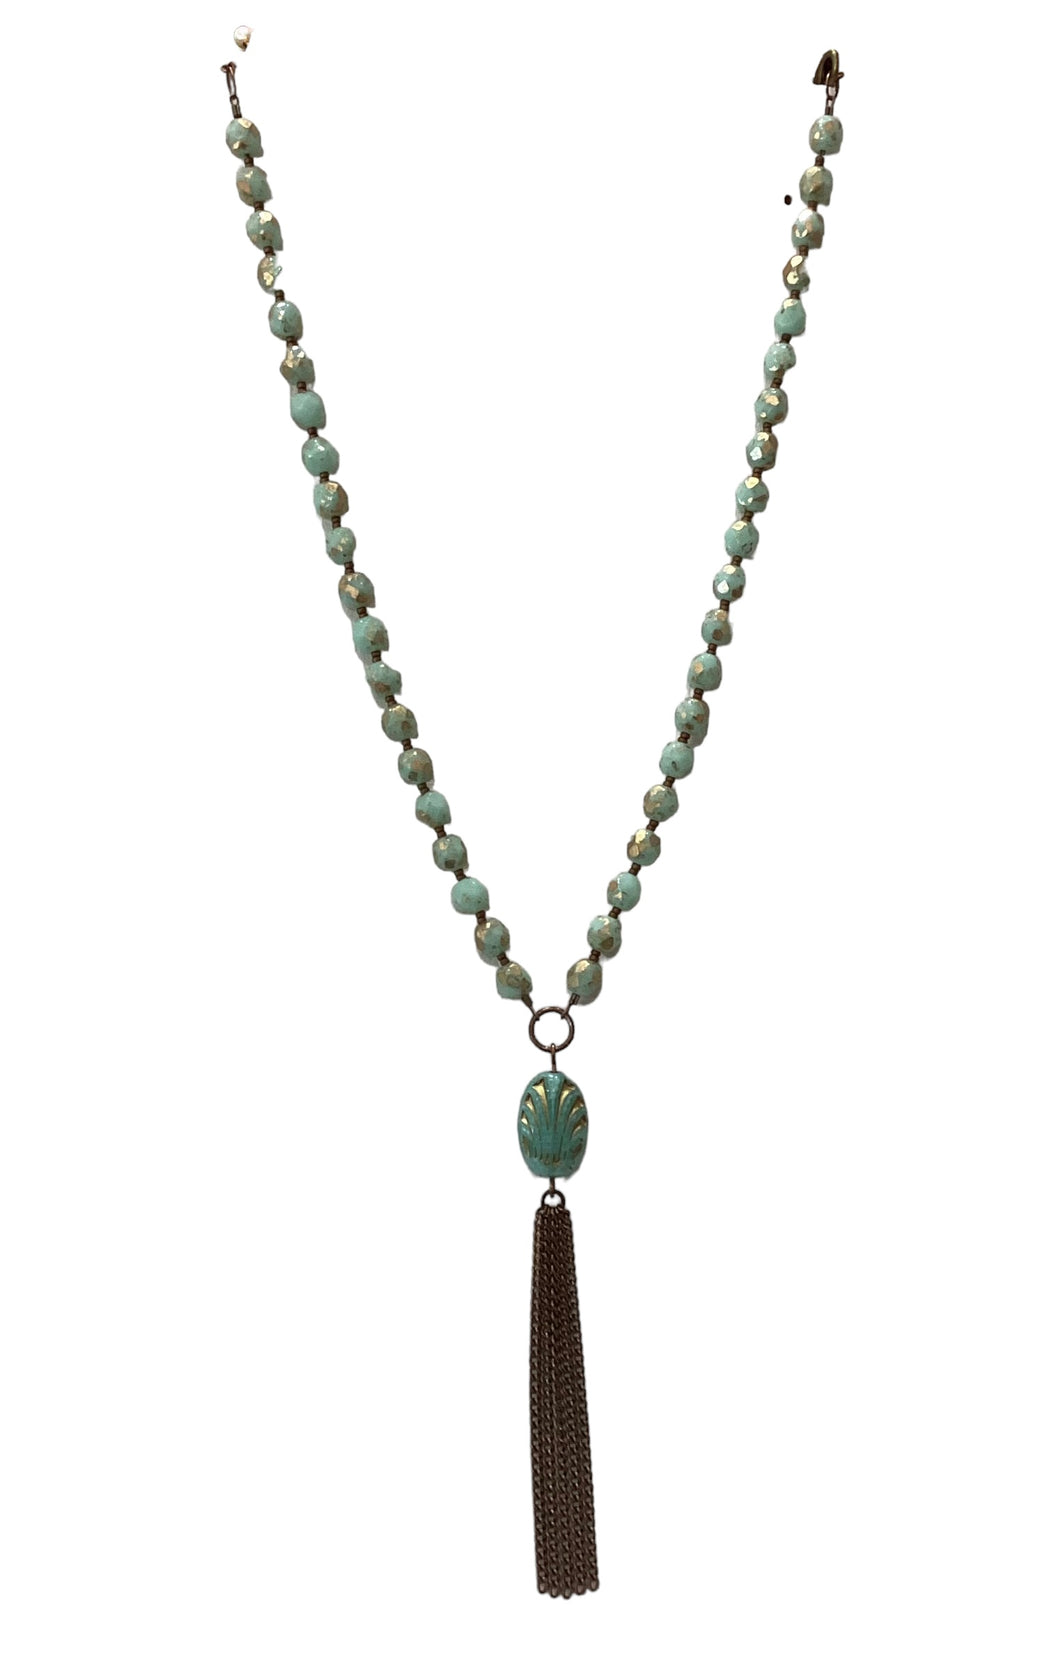 Light Blue Bead with Tassle Necklace - 34